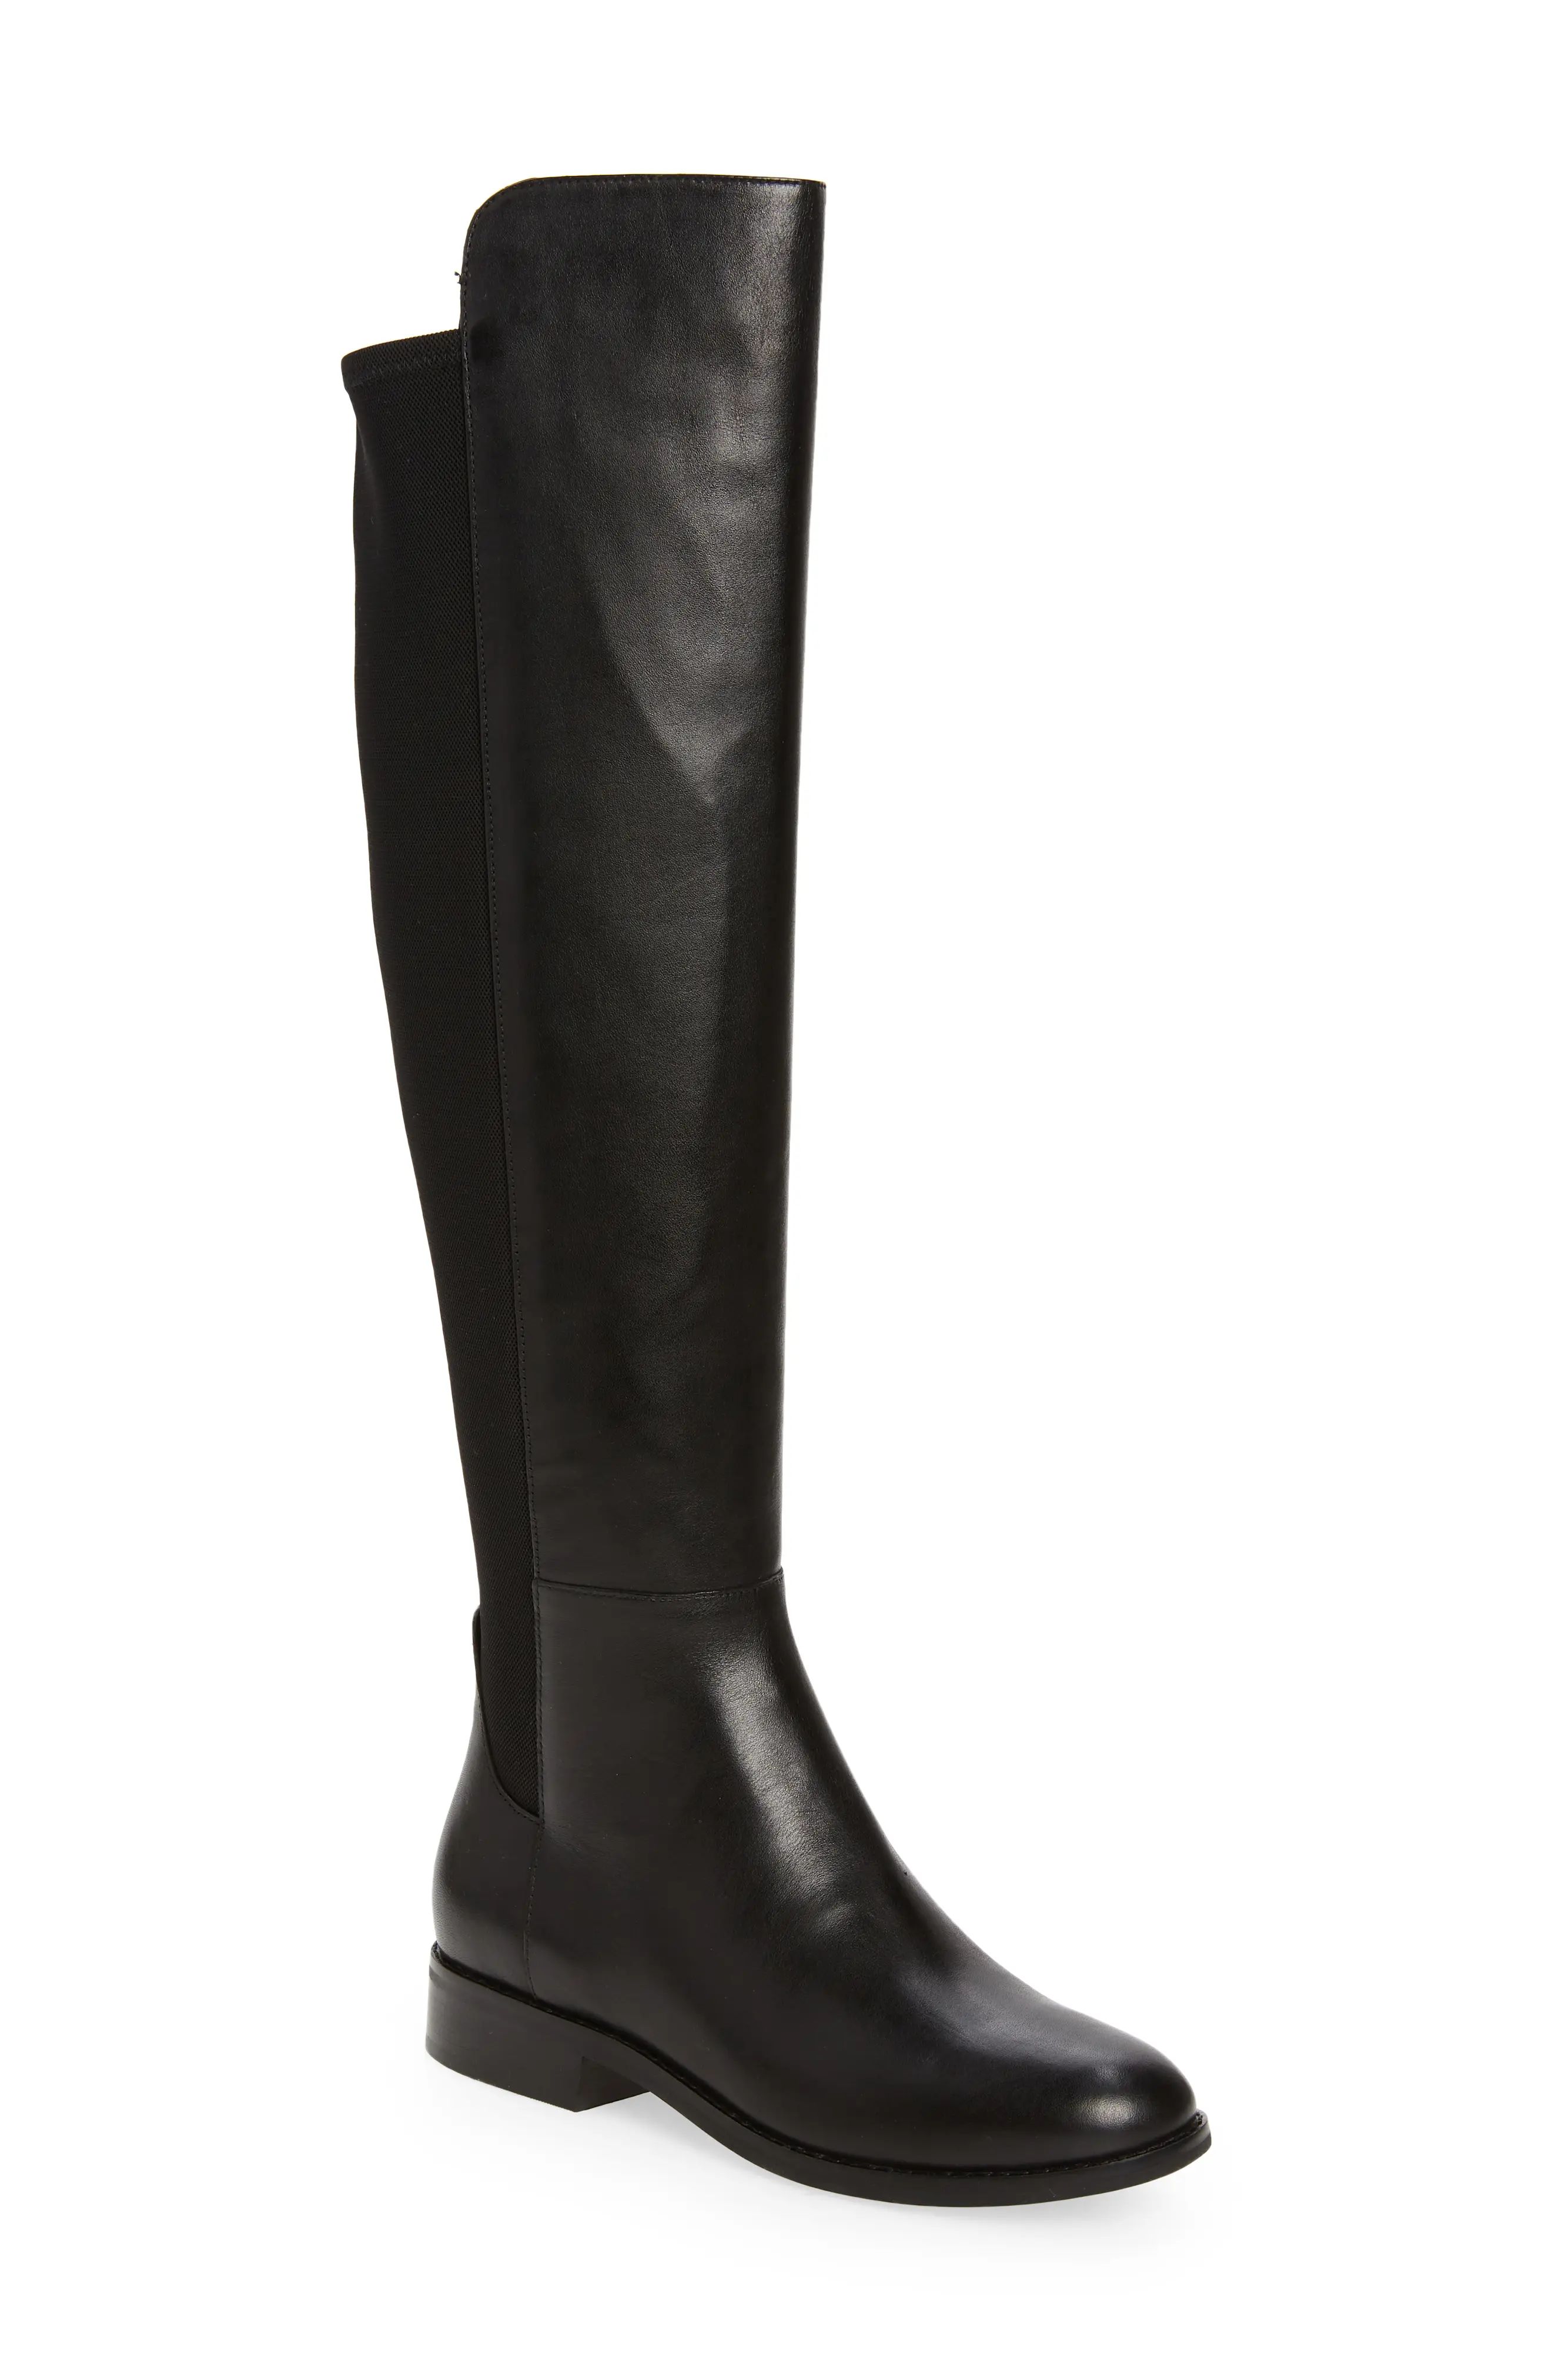 Cole Haan Isabelle Over the Knee Boot in Black Leather at Nordstrom, Size 11 | Nordstrom